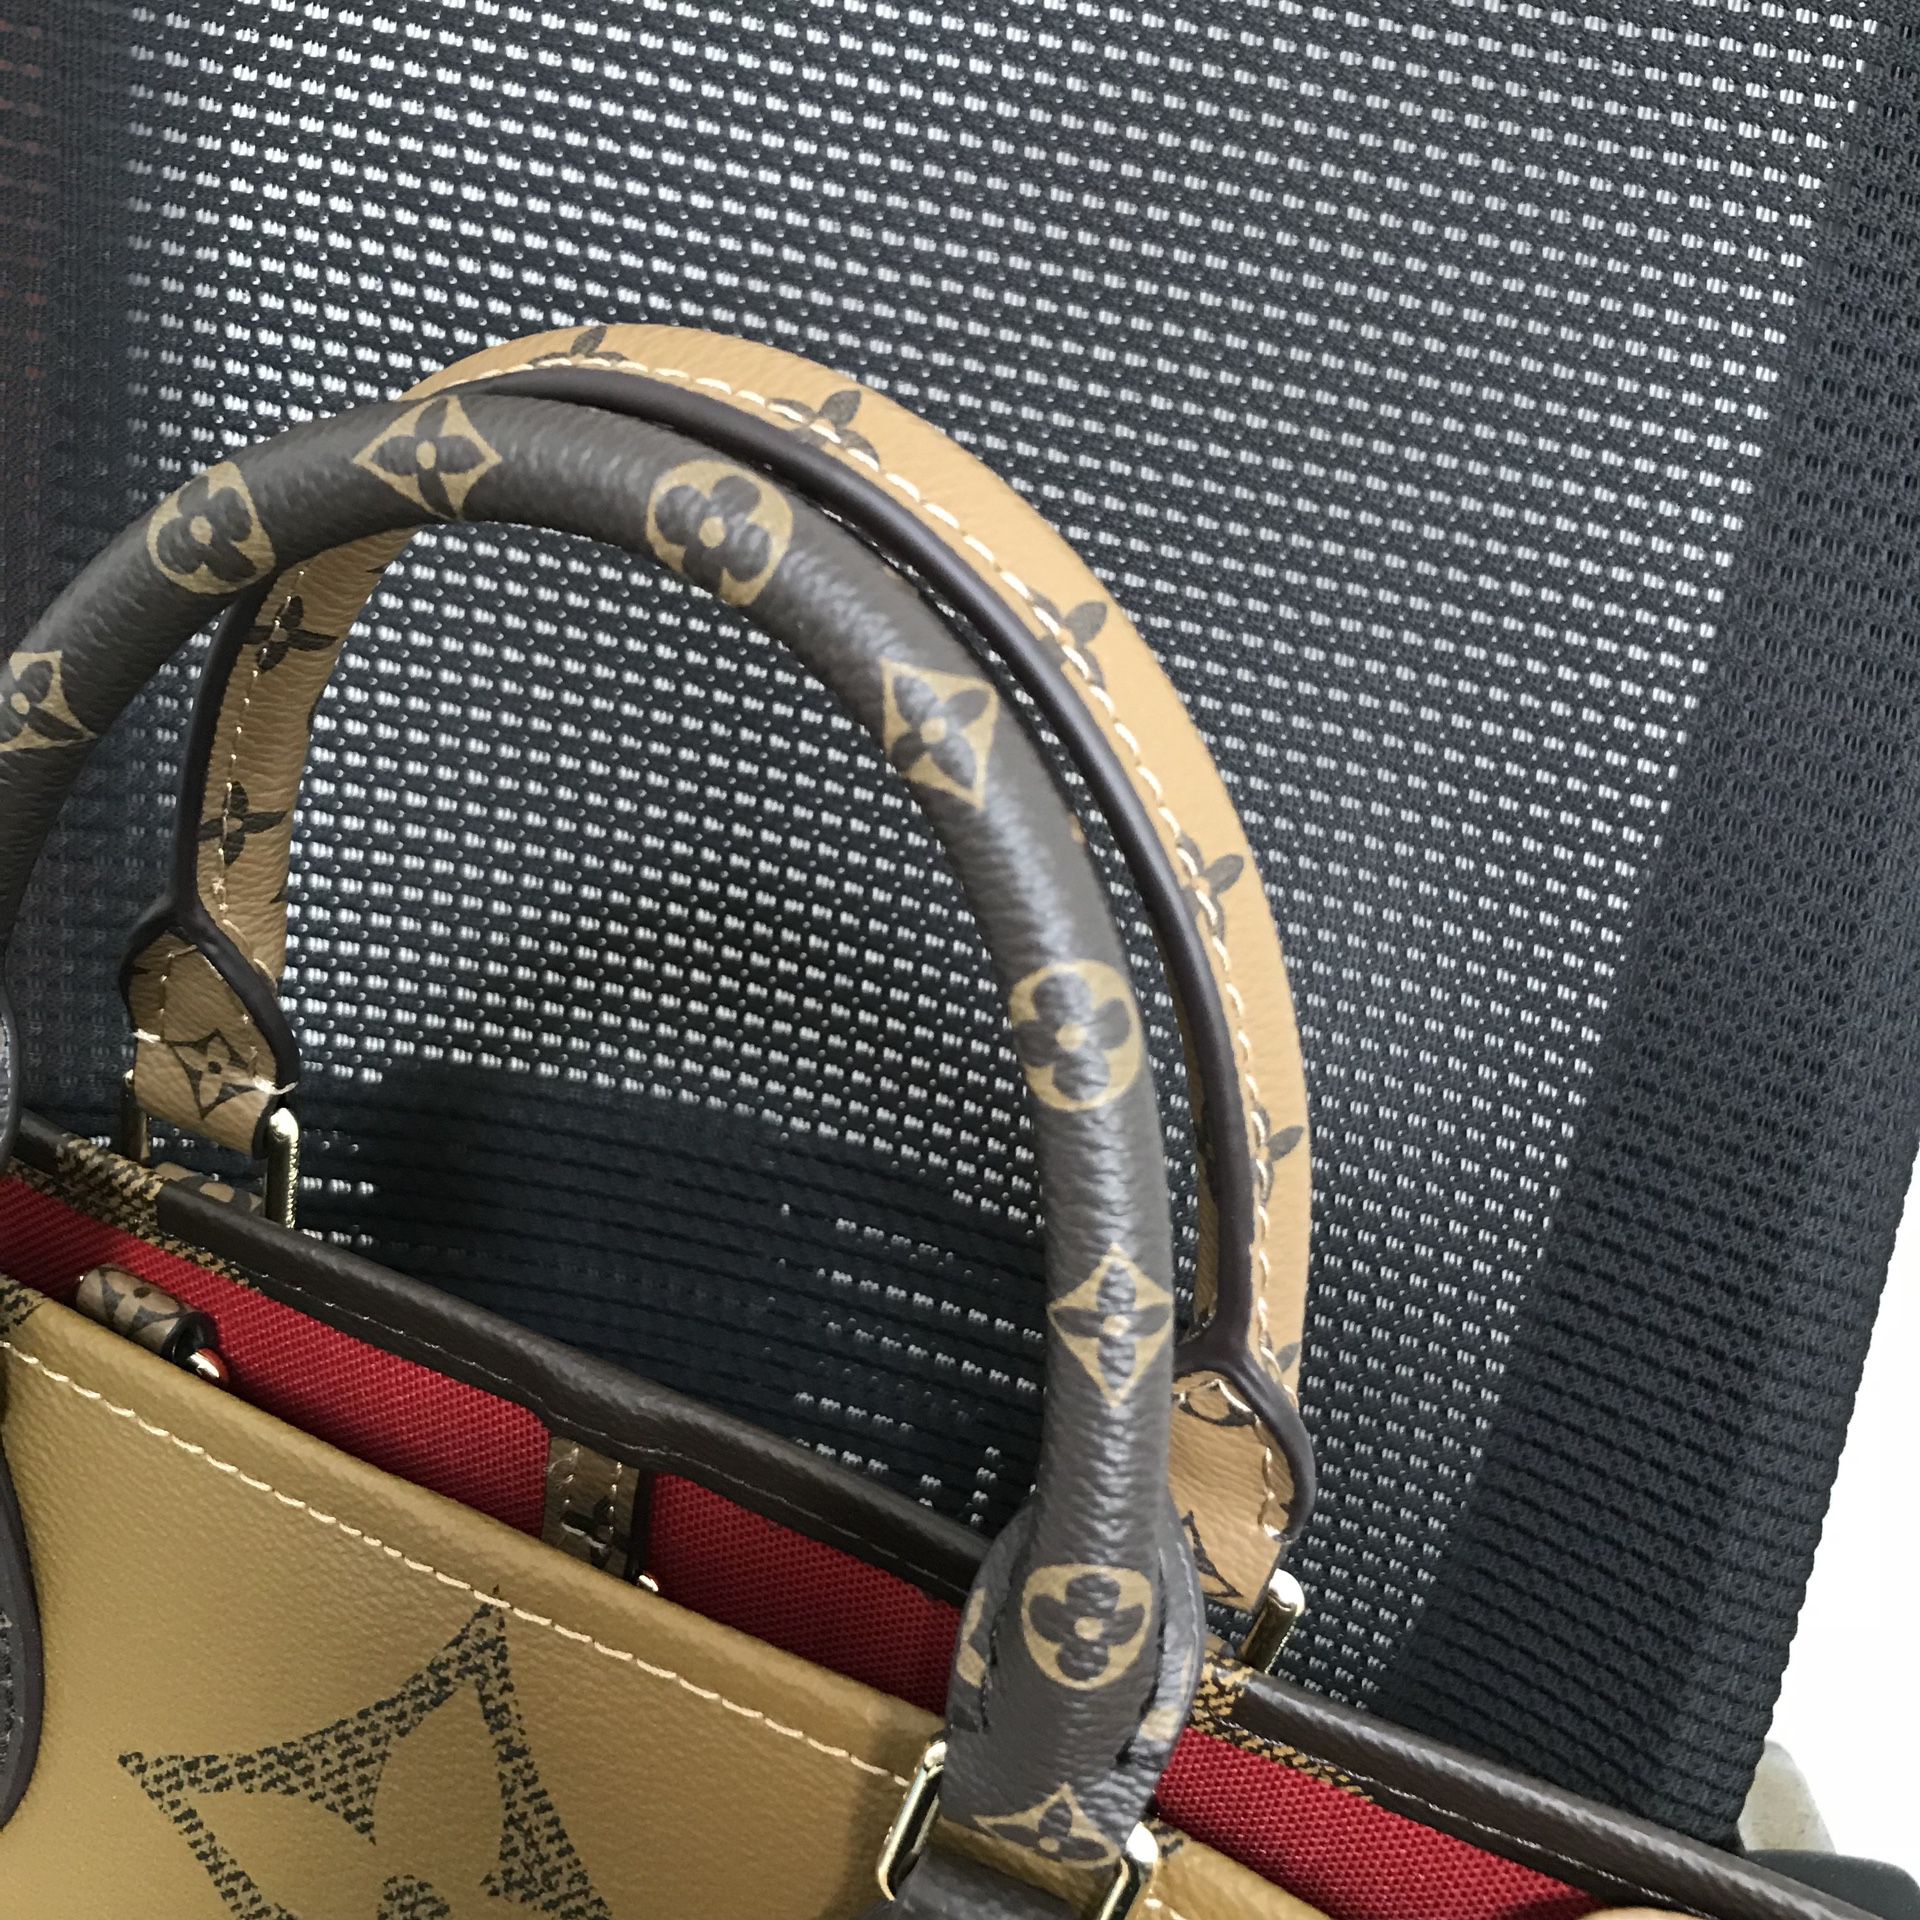 Louis Vuitton Monogram Eclipse Discovery Black Coated Canvas Book Bag Men  for Sale in Brooklyn, NY - OfferUp